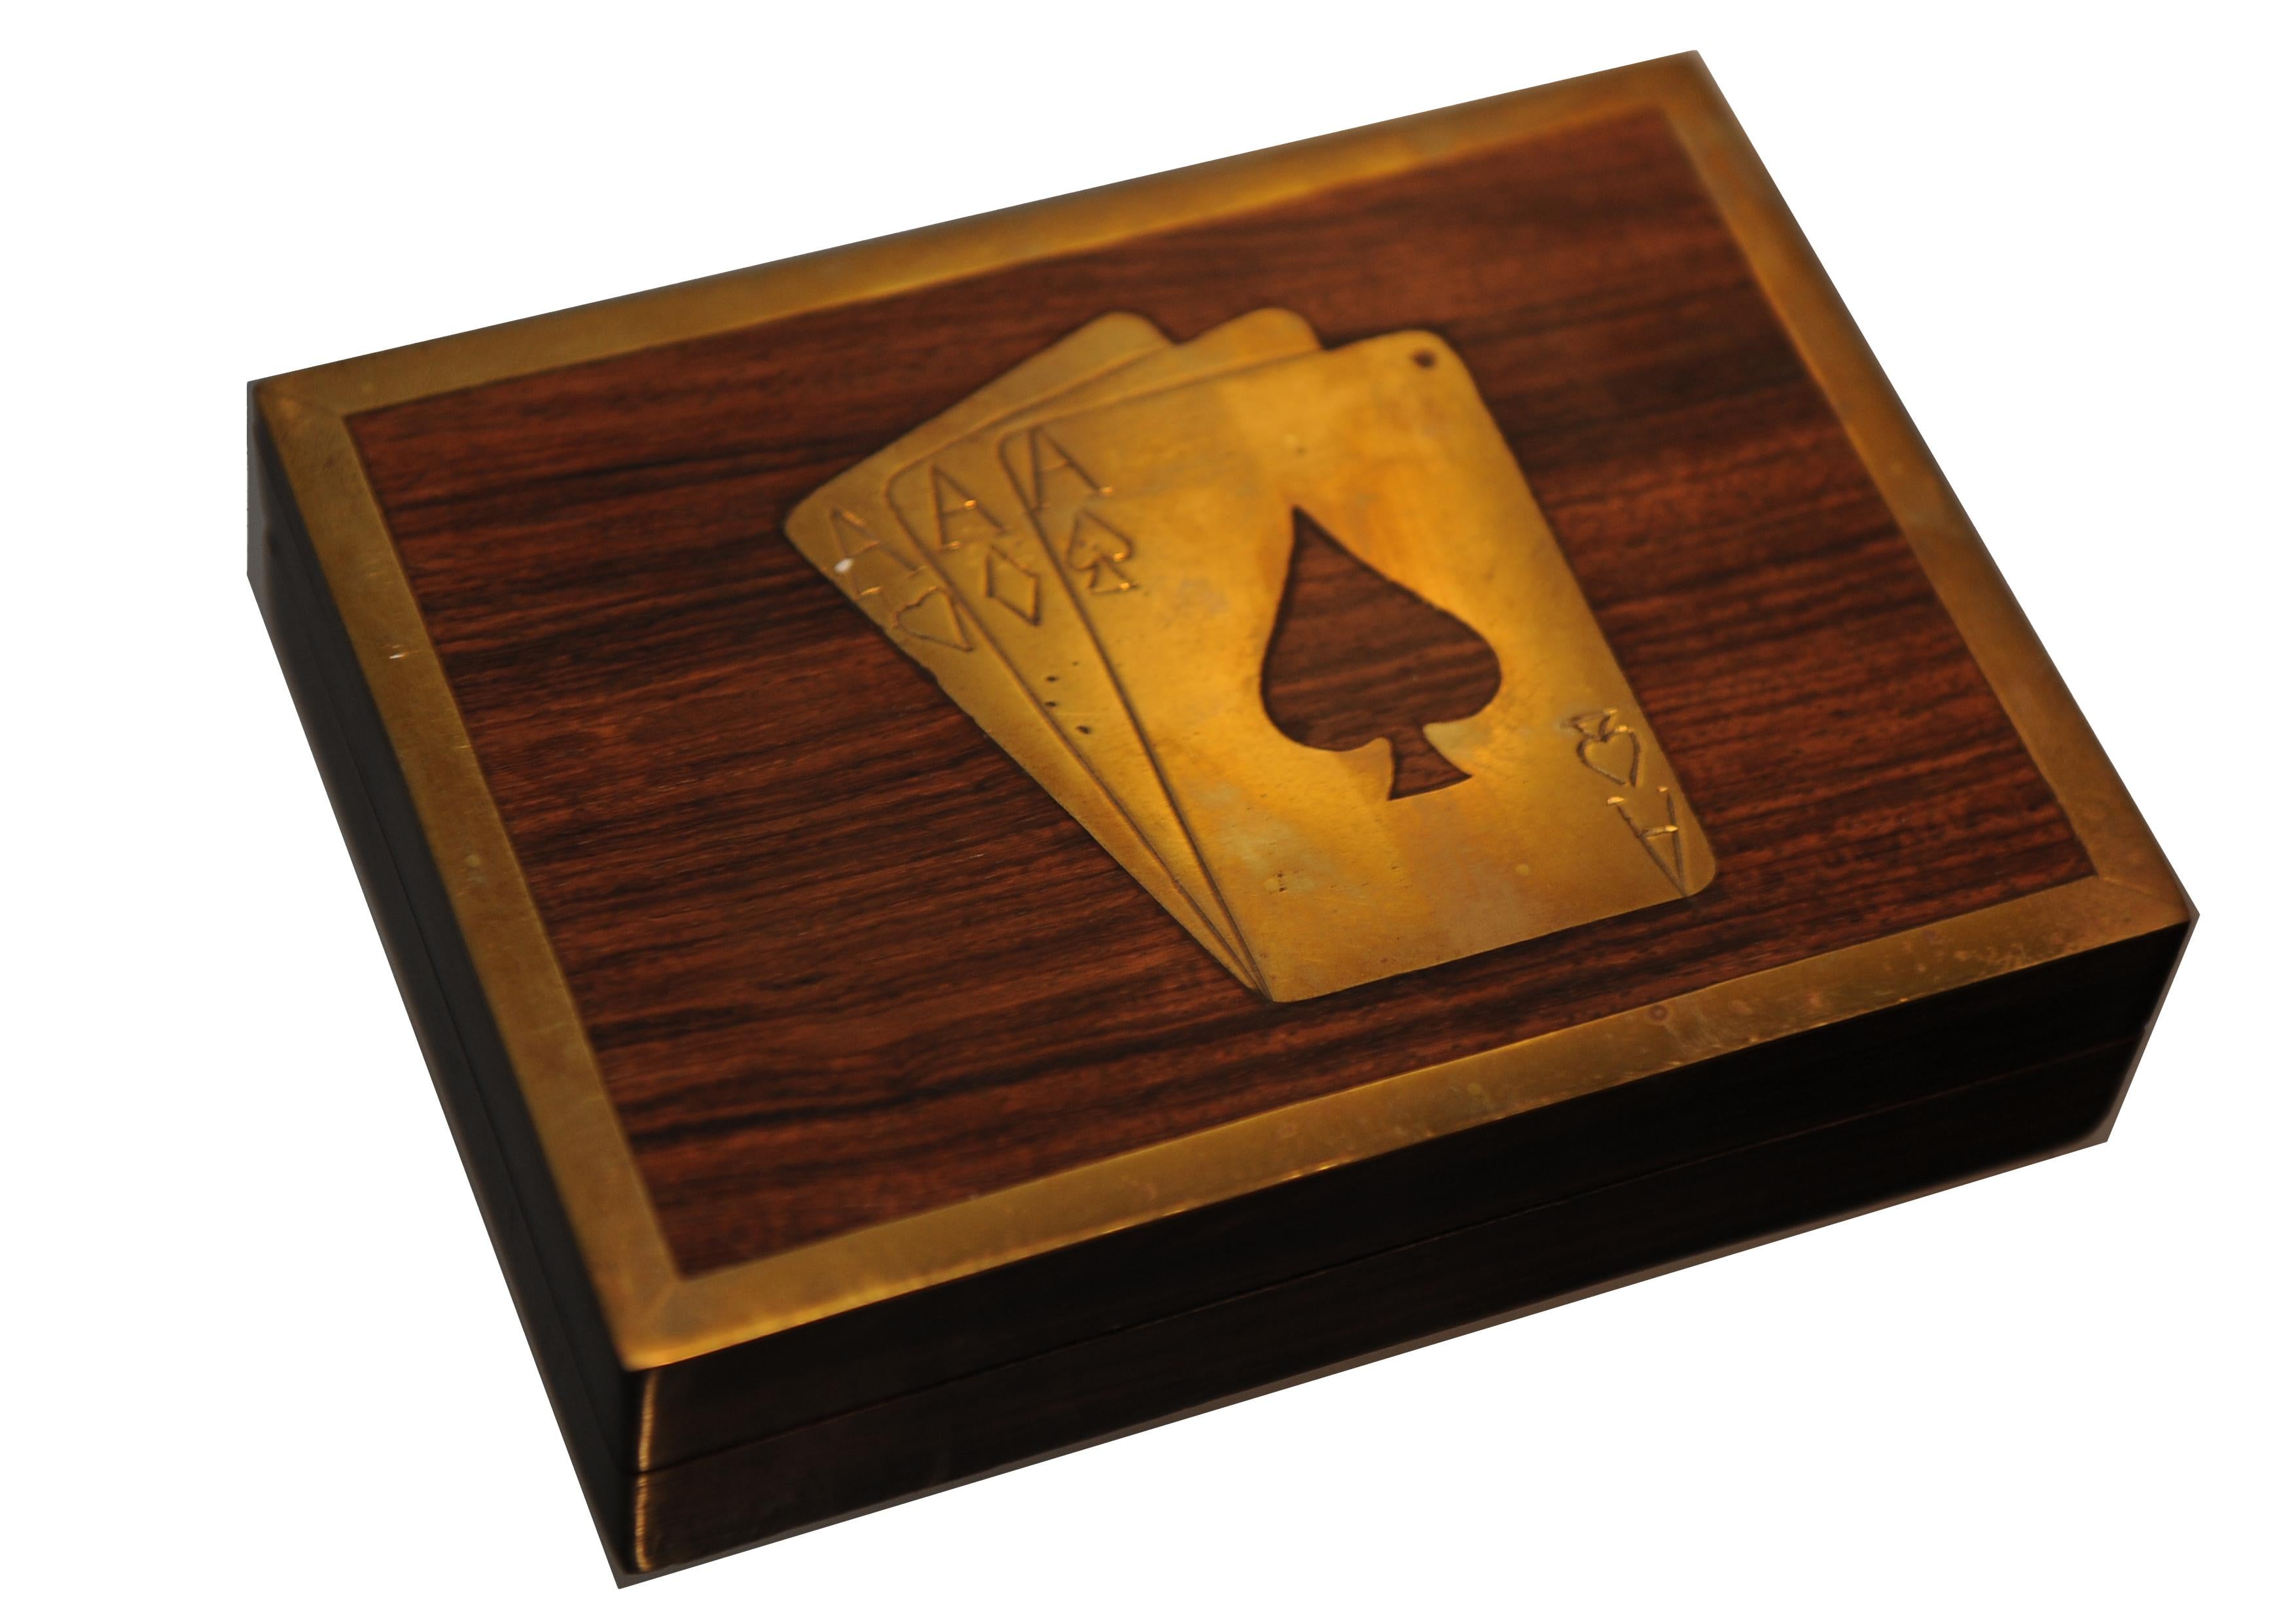 British 1930's Art Deco Ace of Spades Boxed Set Complete With Will's Woodbine's Cards 